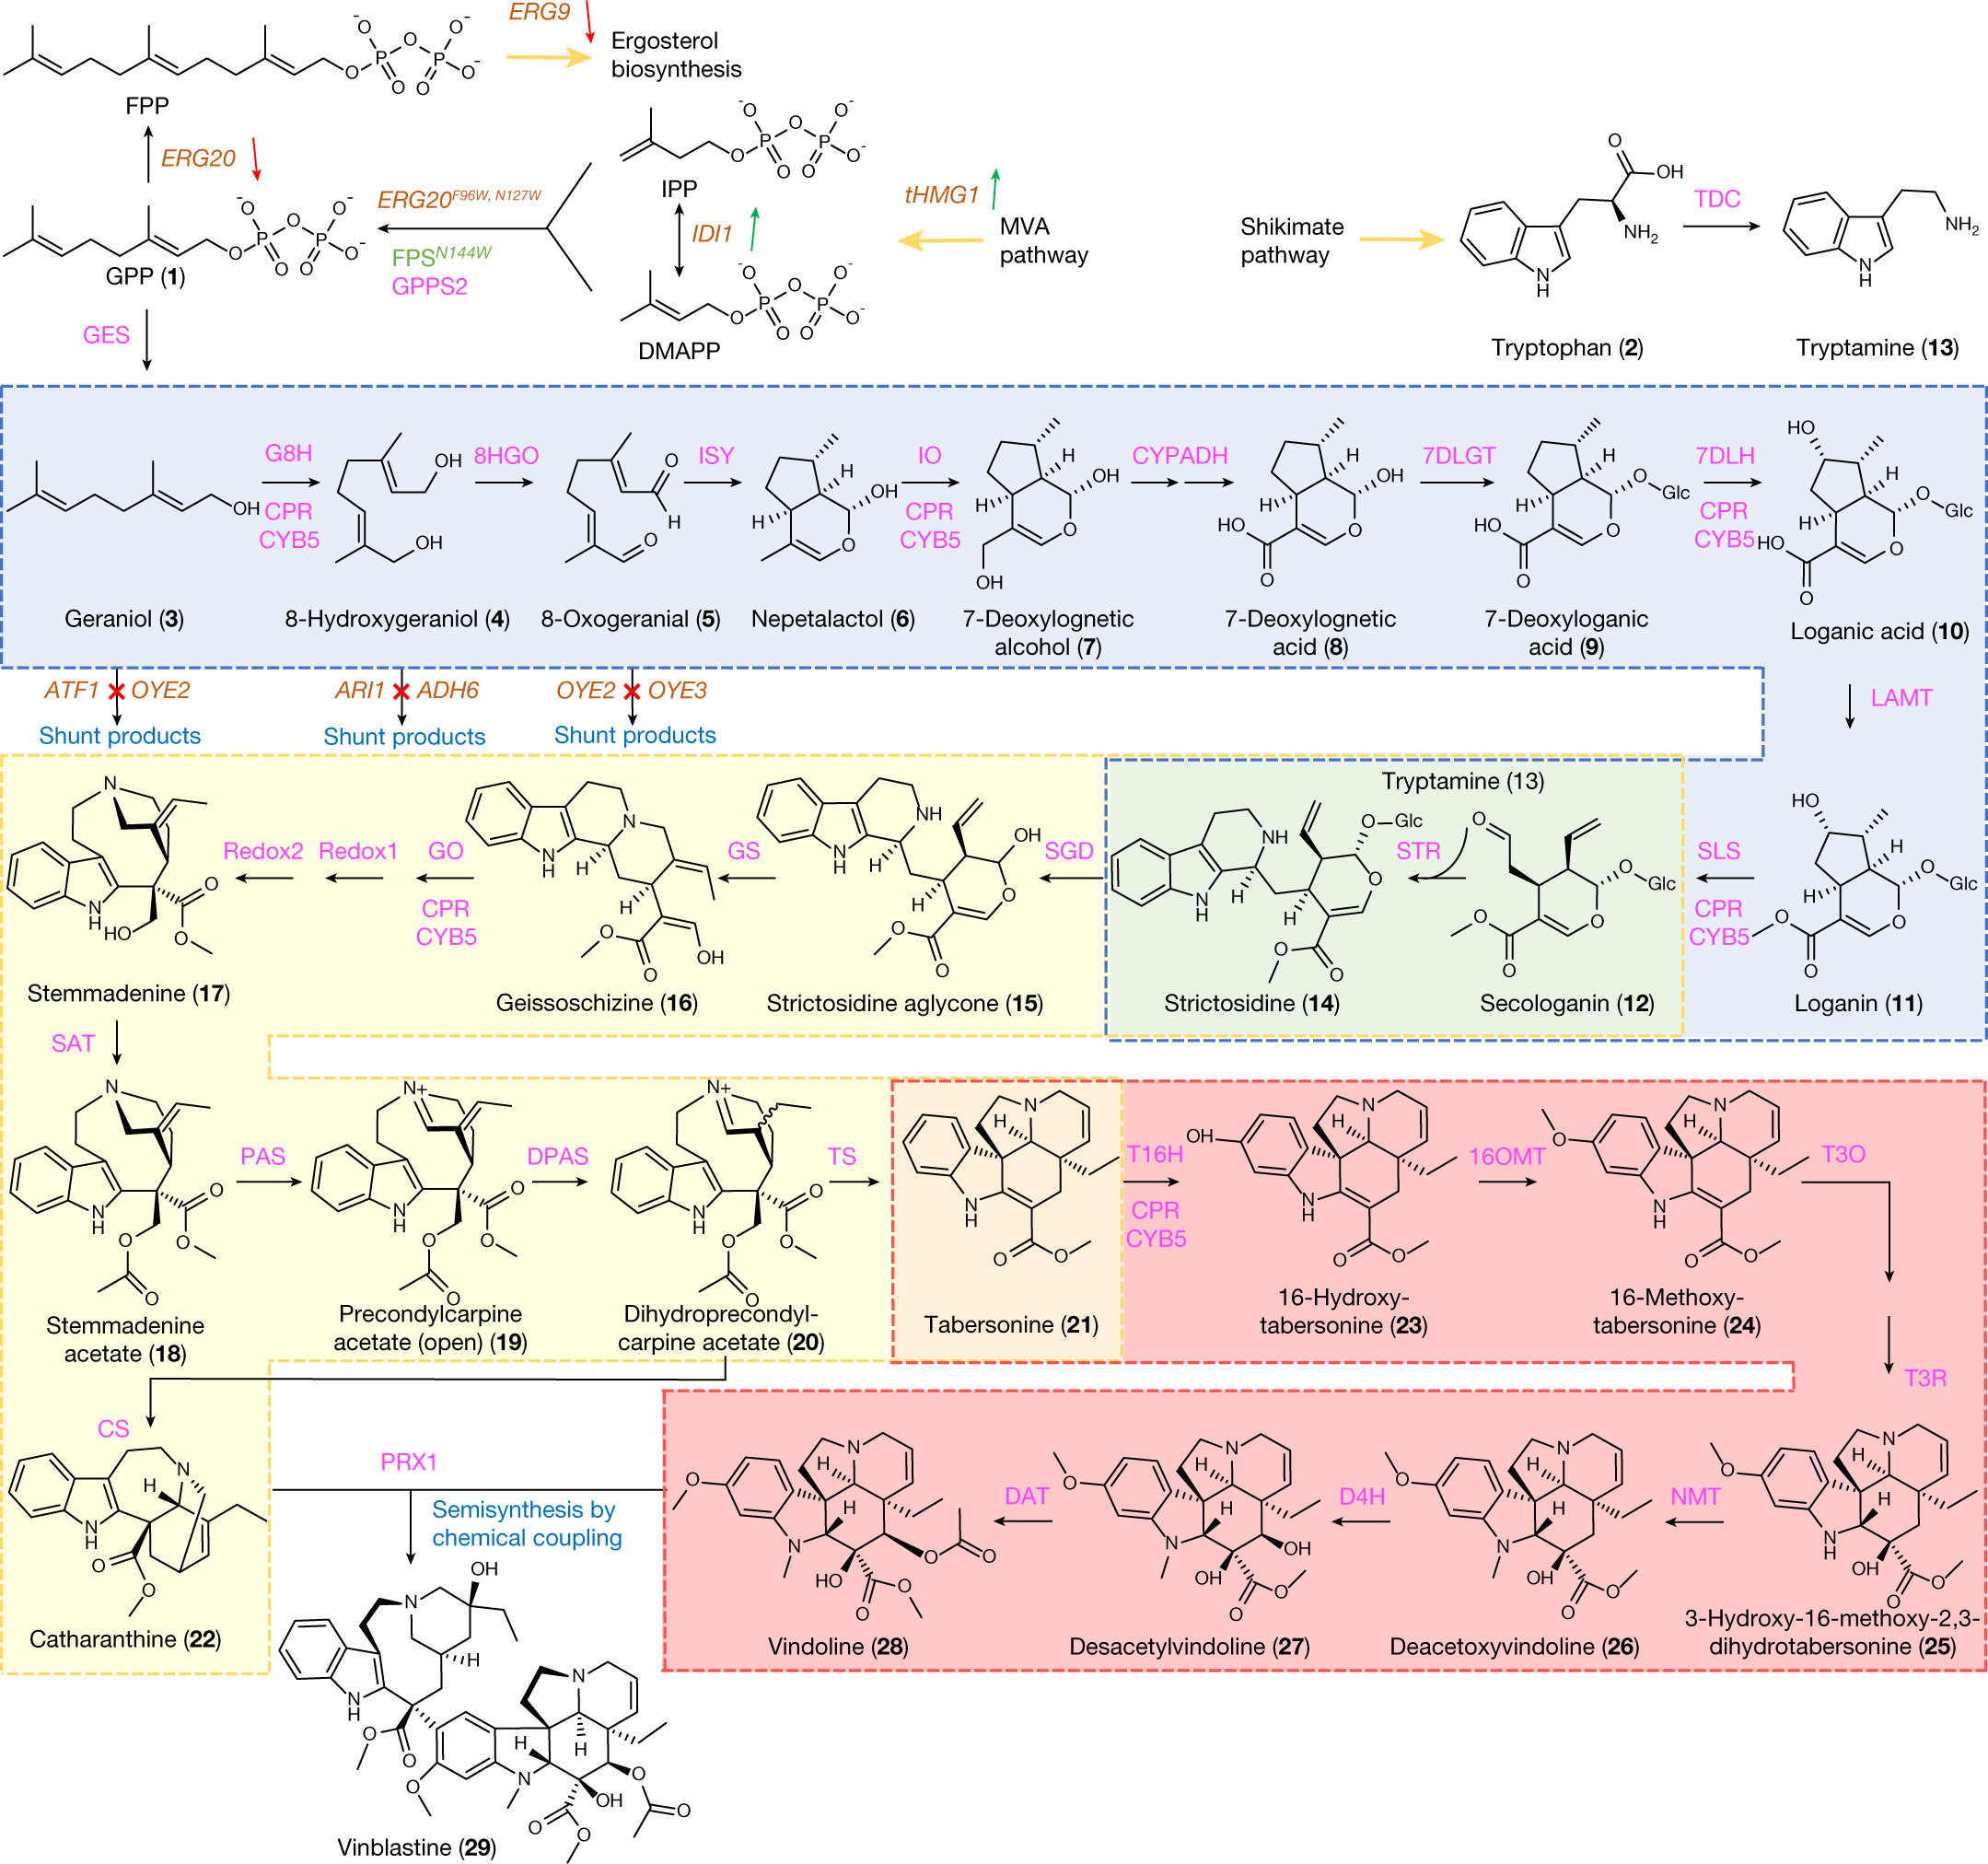 A microbial supply chain for production of the anti-cancer drug vinblastine  | Nature